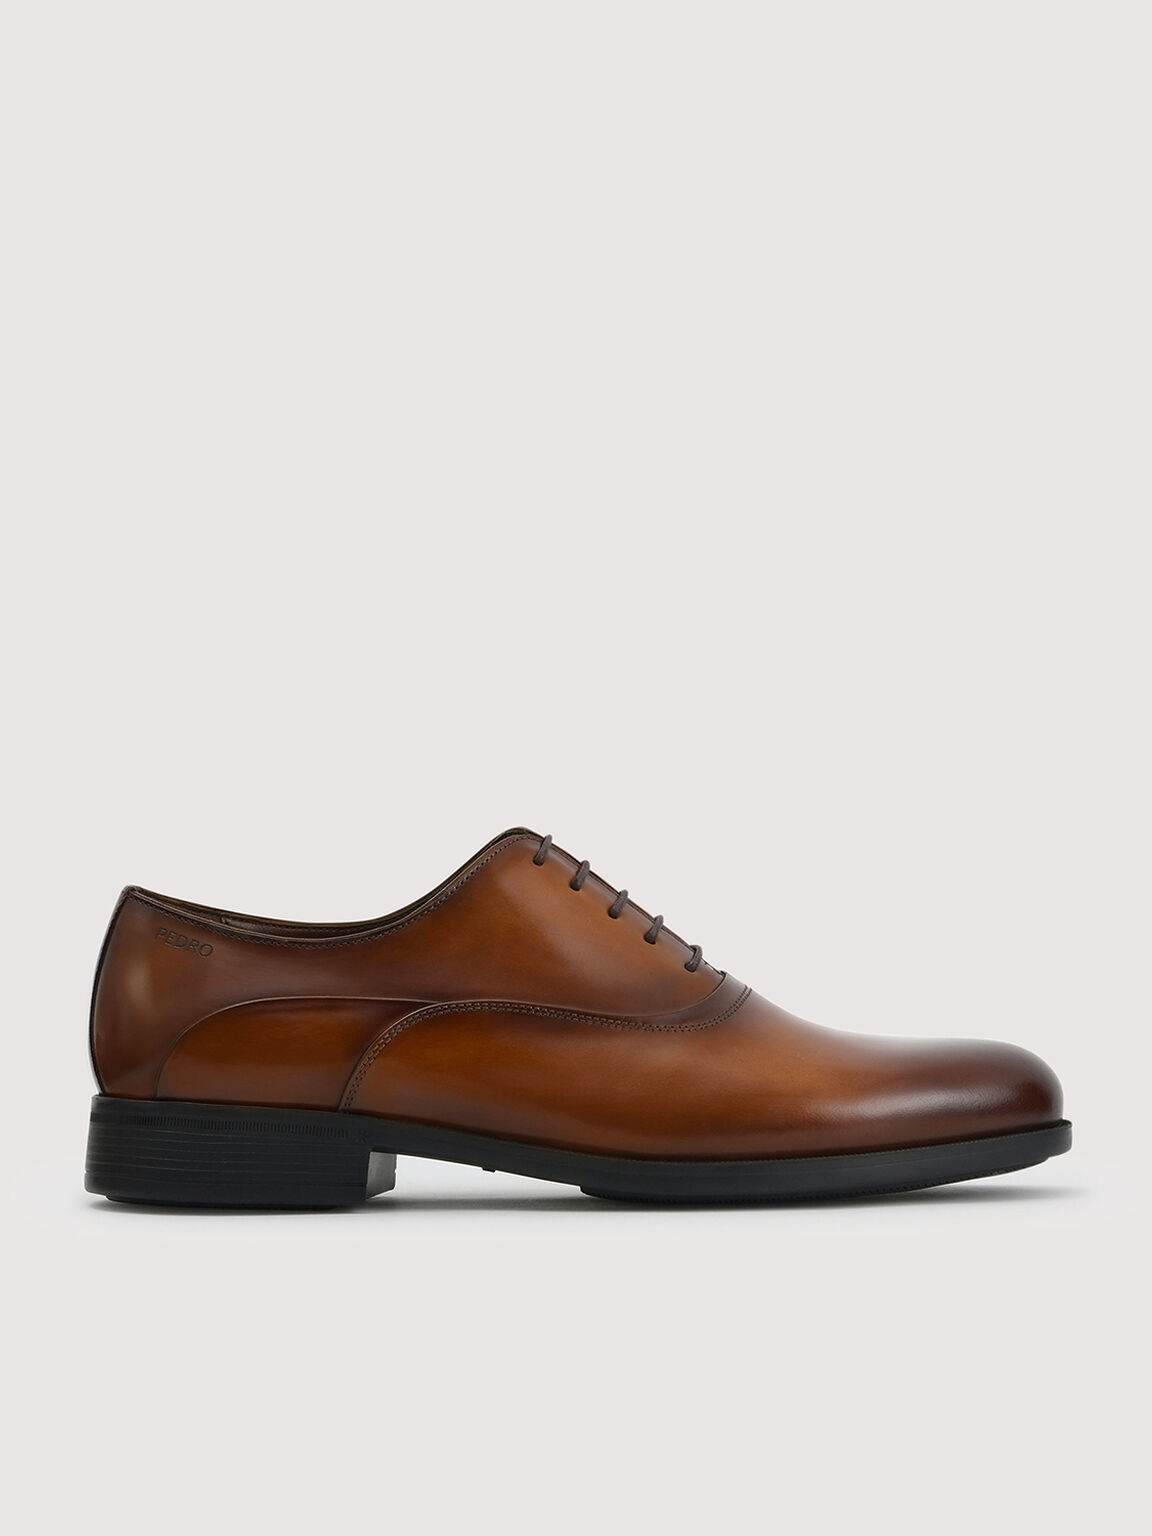 Lightweight Leather Oxford Shoes, Cognac